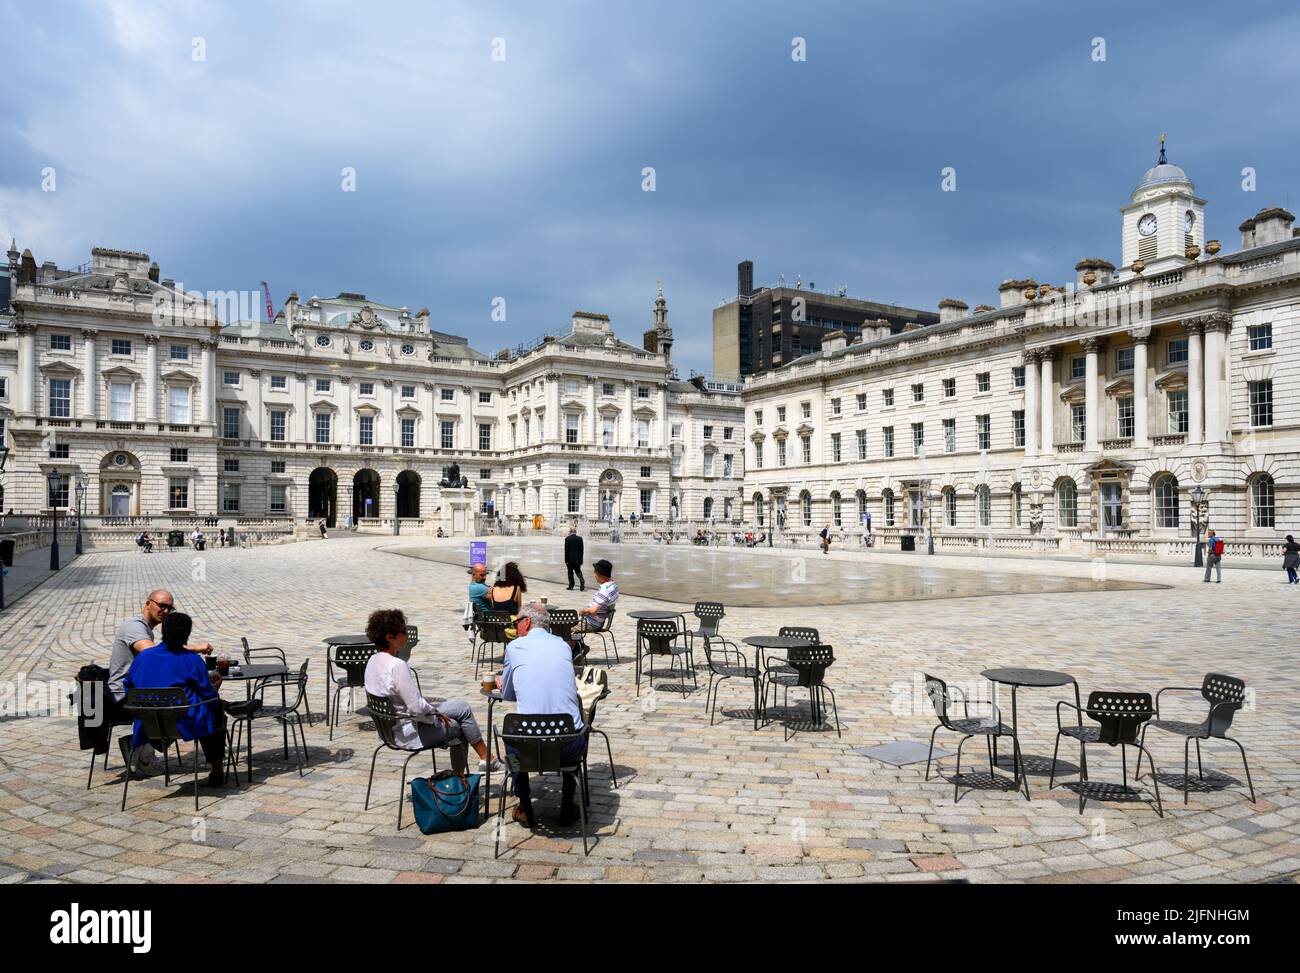 The Courtyard at Somerset House, The Strand, Londres, Angleterre, Royaume-Uni Banque D'Images